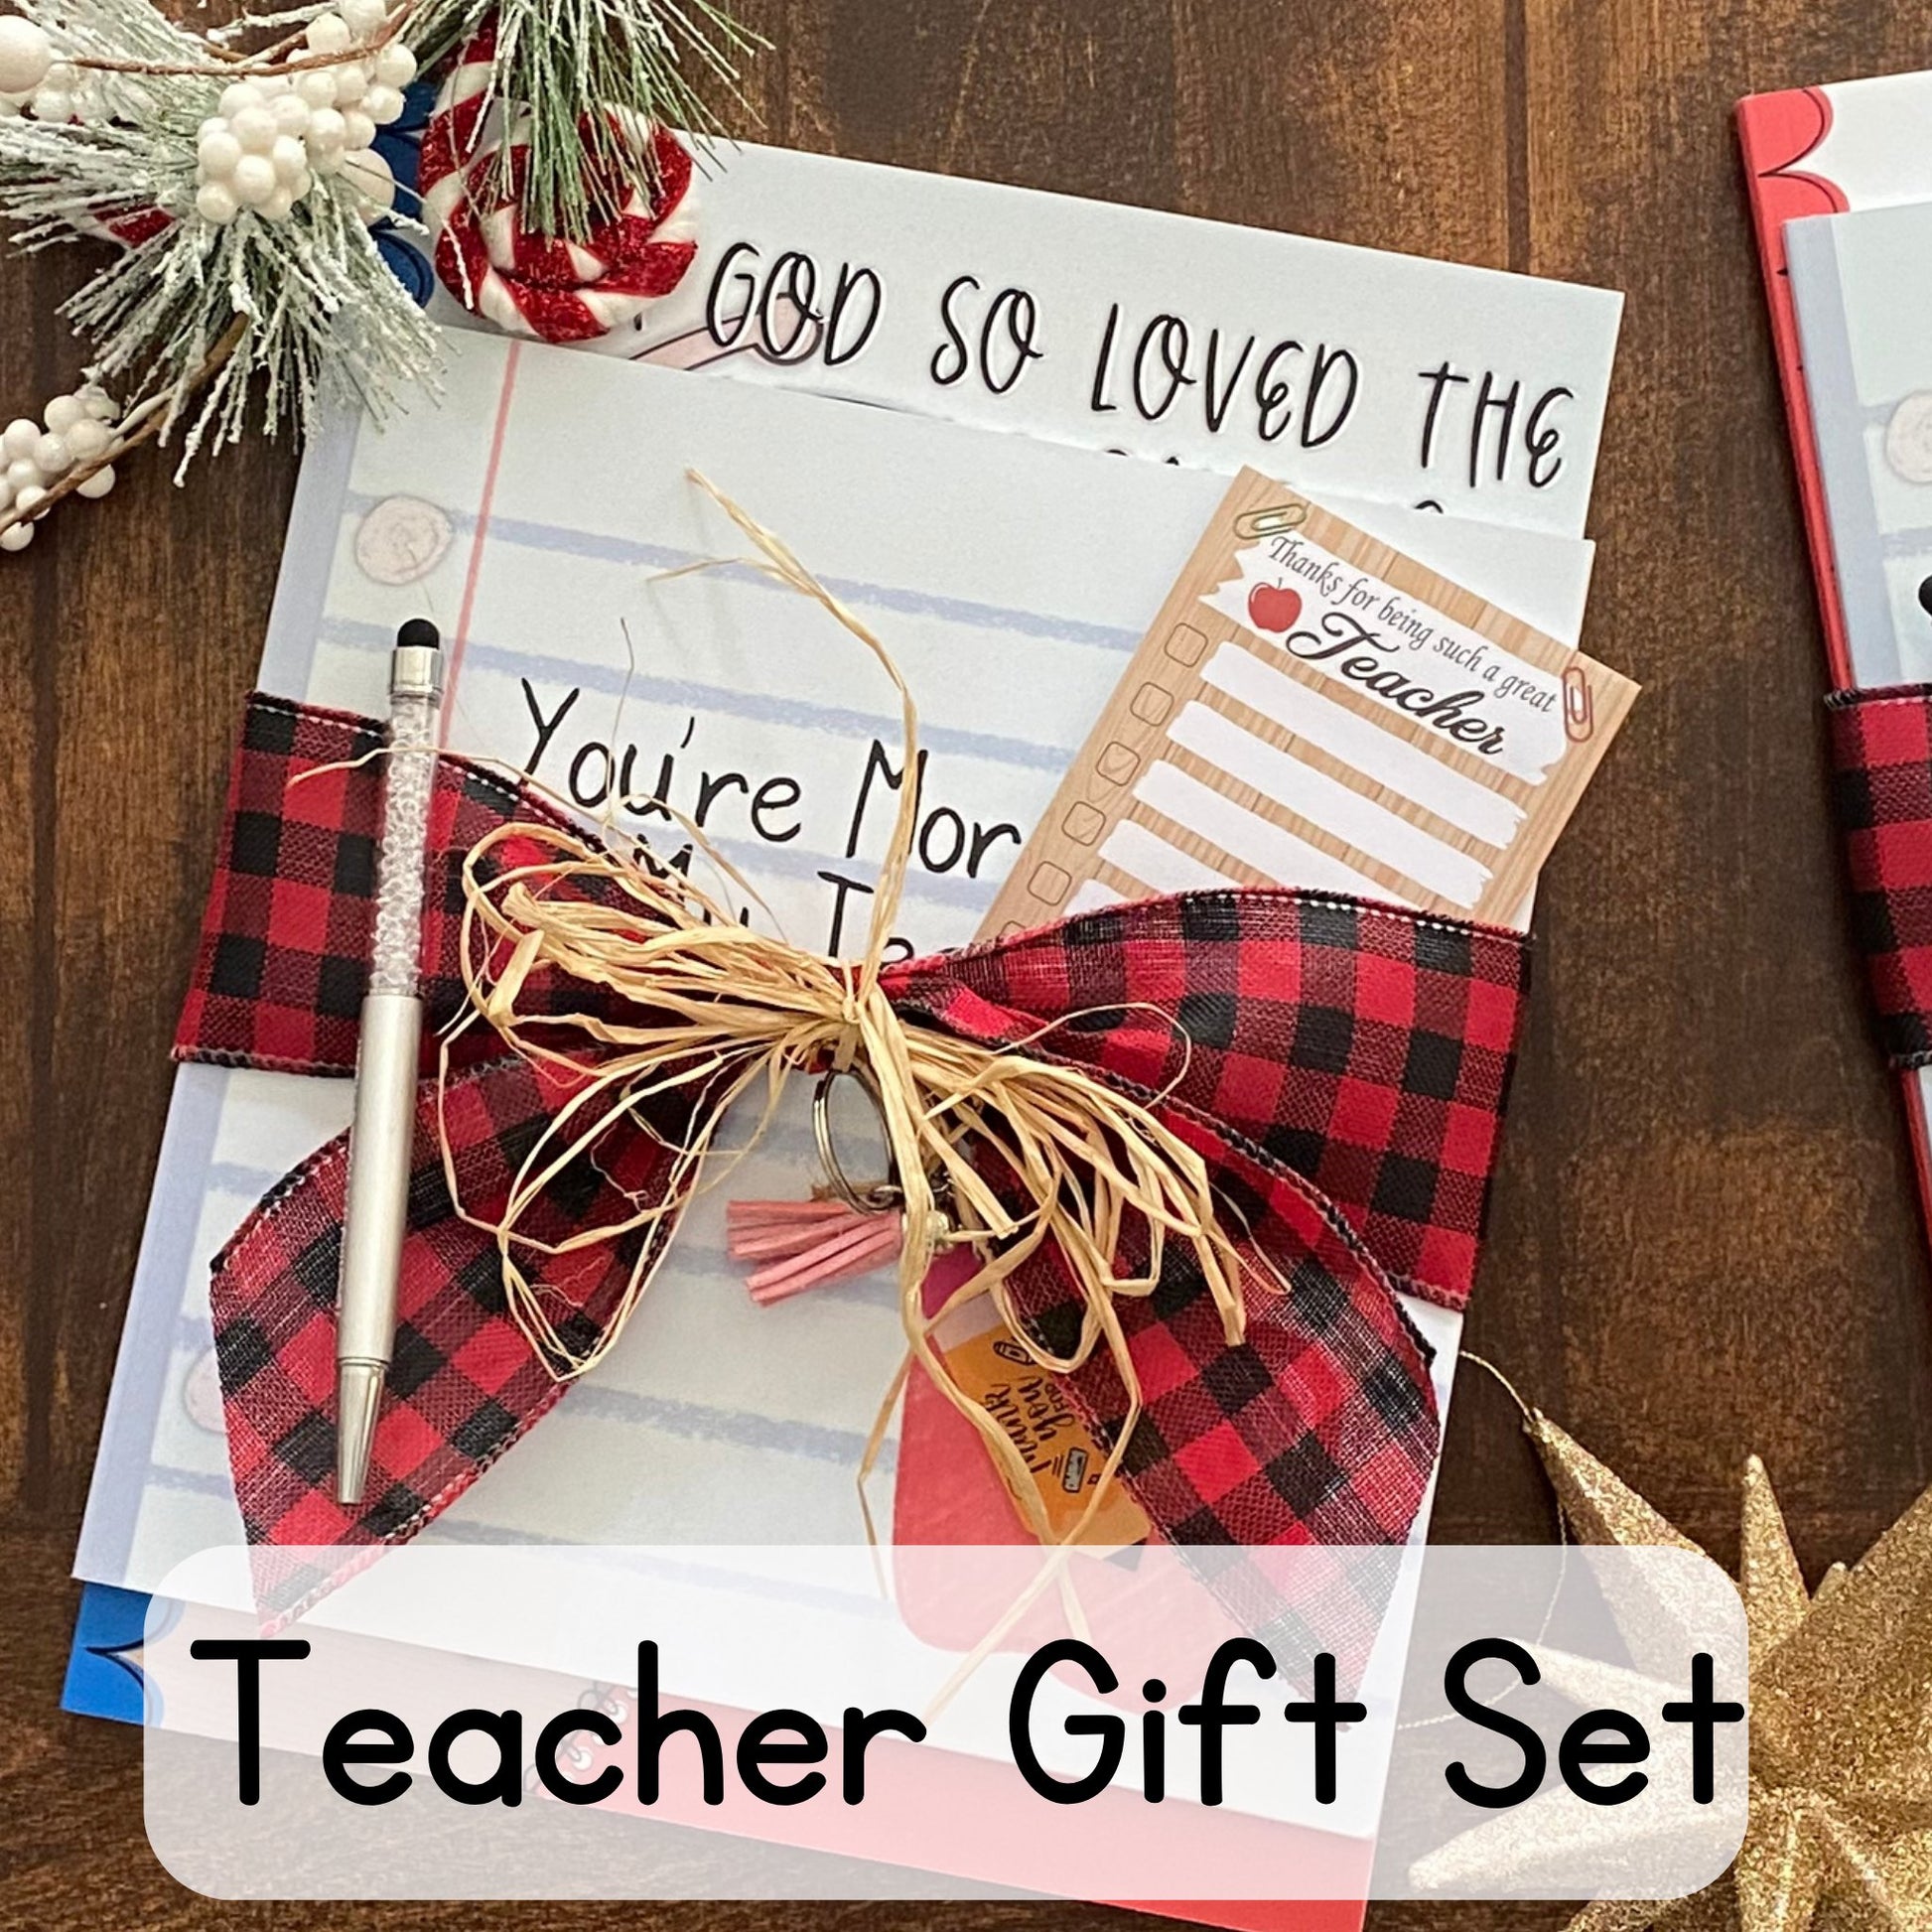 Front image of the teacher gift set self published through Amazon KDP and Kindle Direct Publishing that includes an autographed copy of "You're More Than My Teacher."